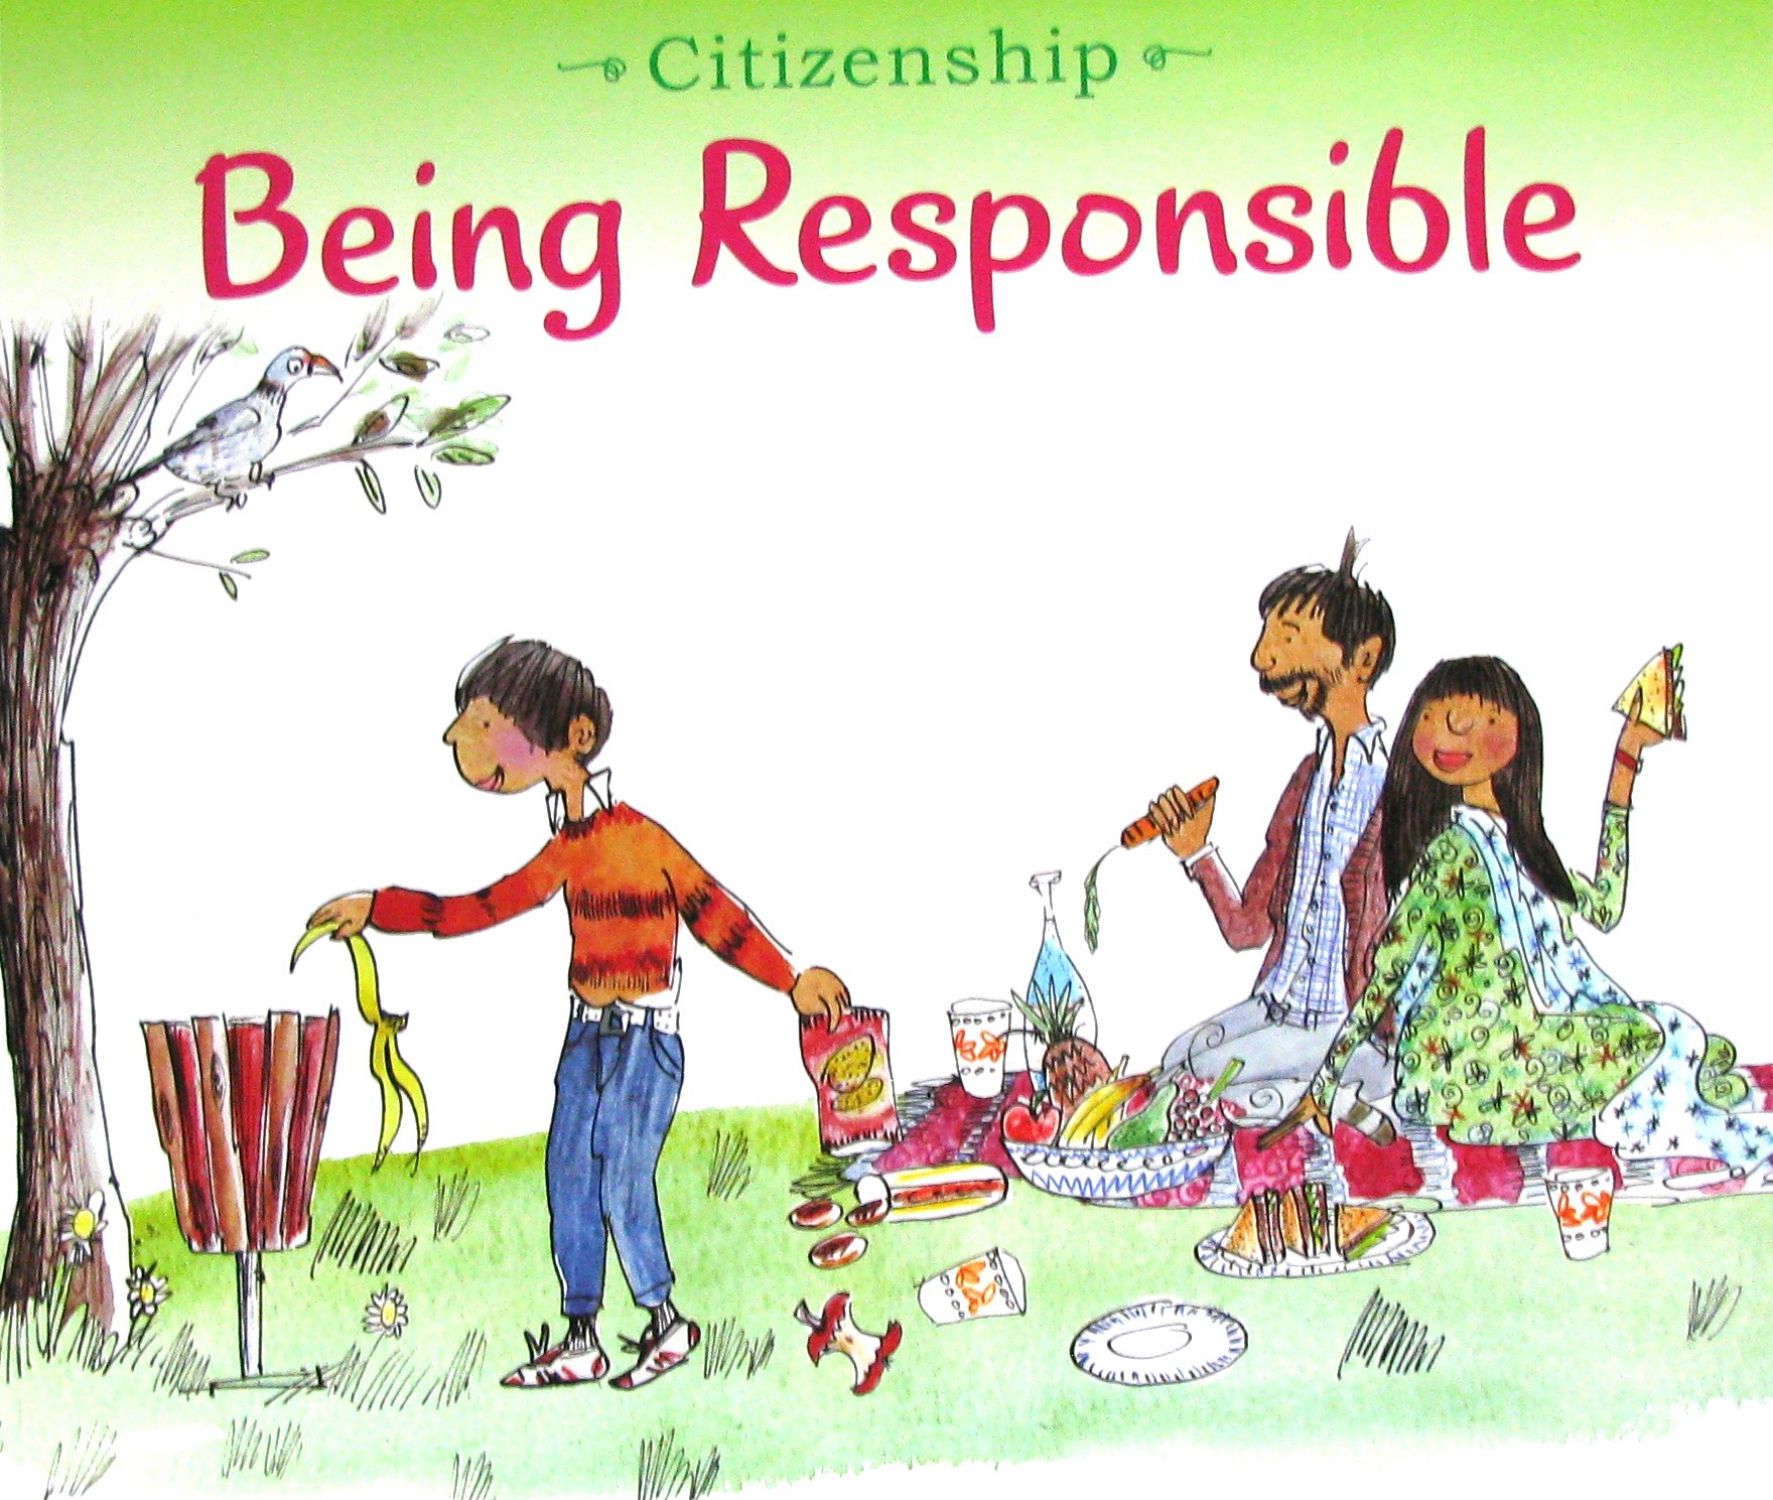 citizenship: being responsible